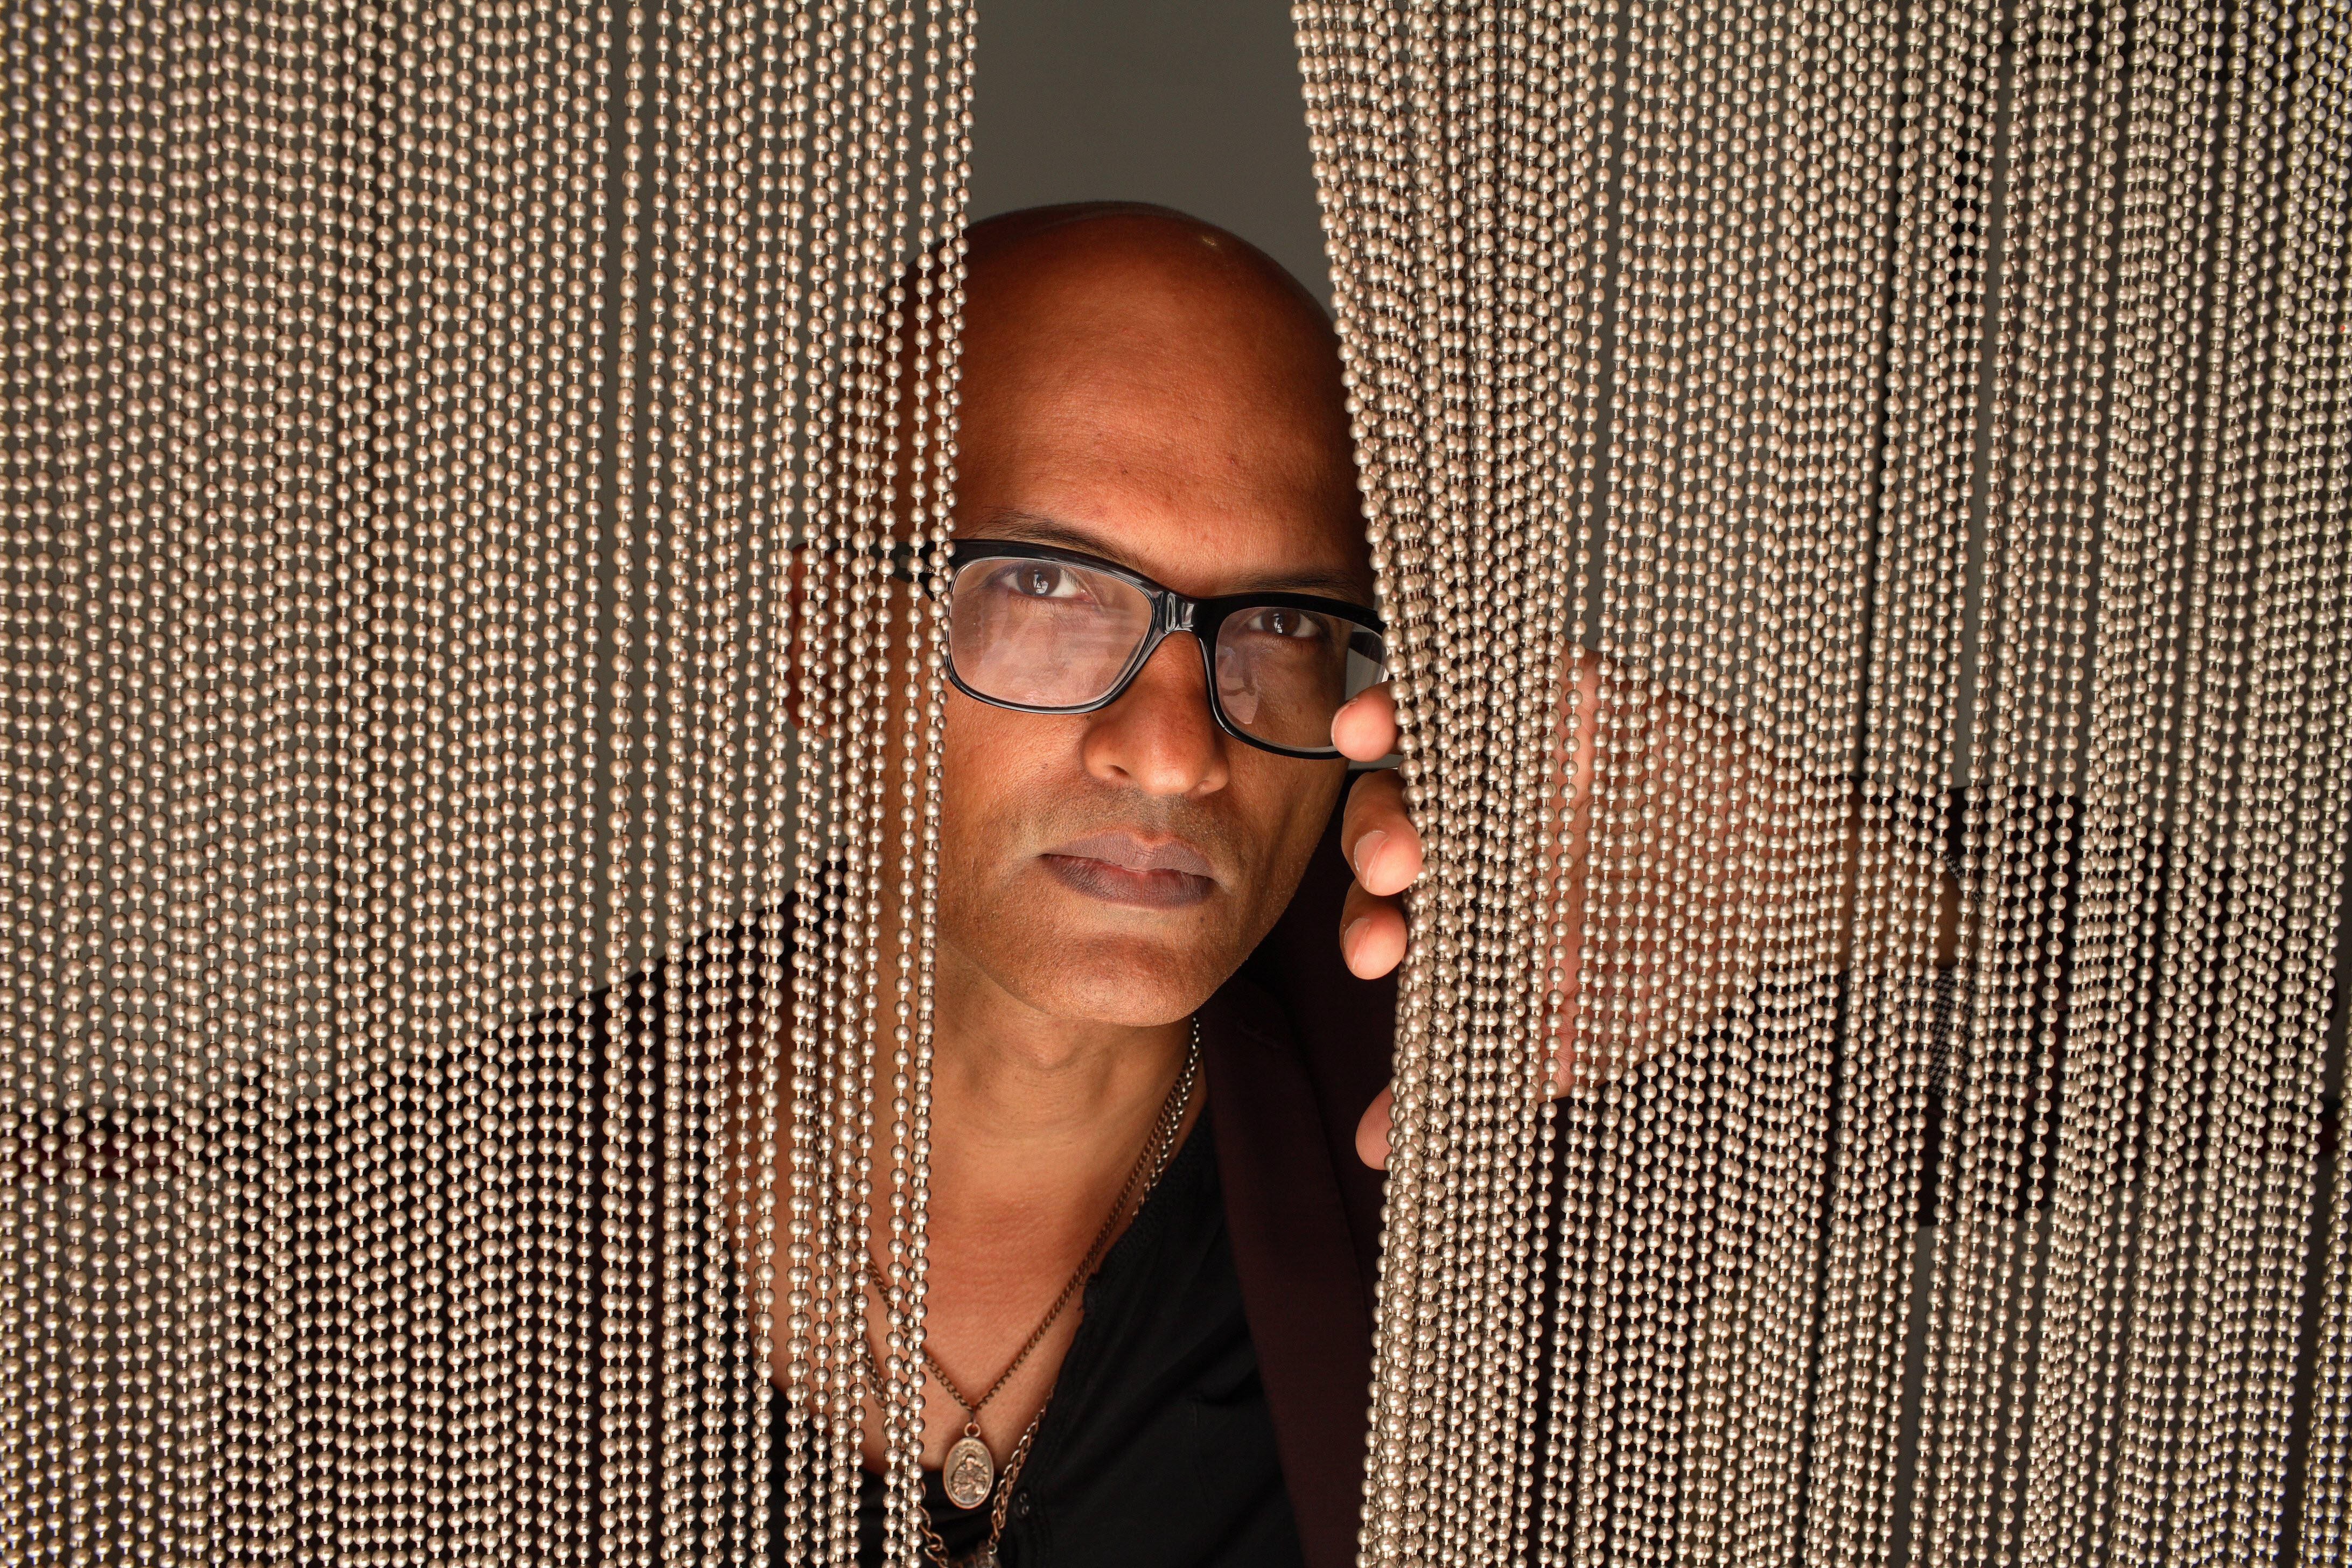 Indian author Jeet Thayil, who spent his teenage years in Hong Kong. Picture: Alamy